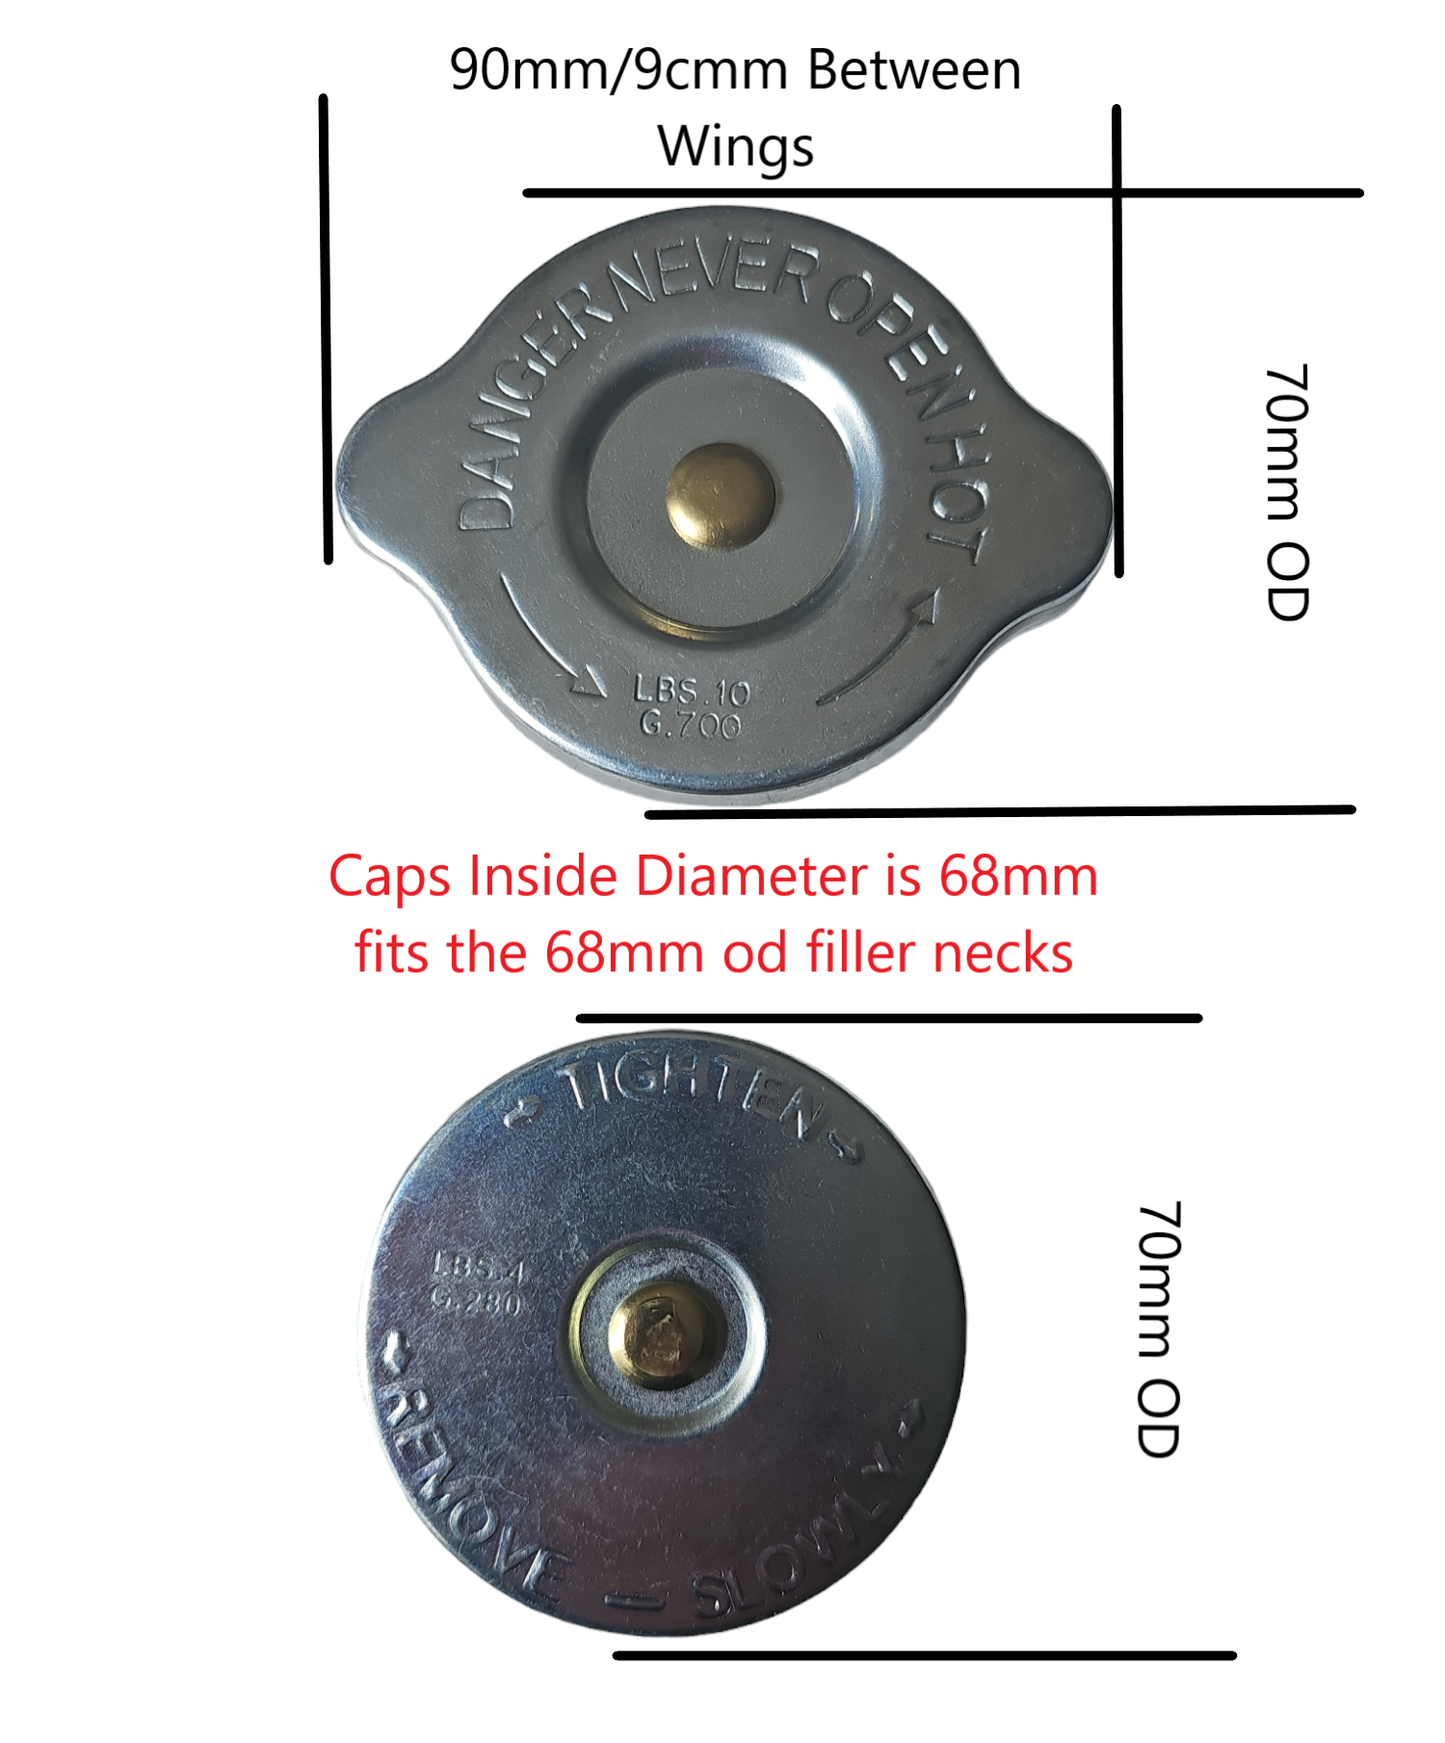 sizes of a round and winged radiator cap 70mm in diameter